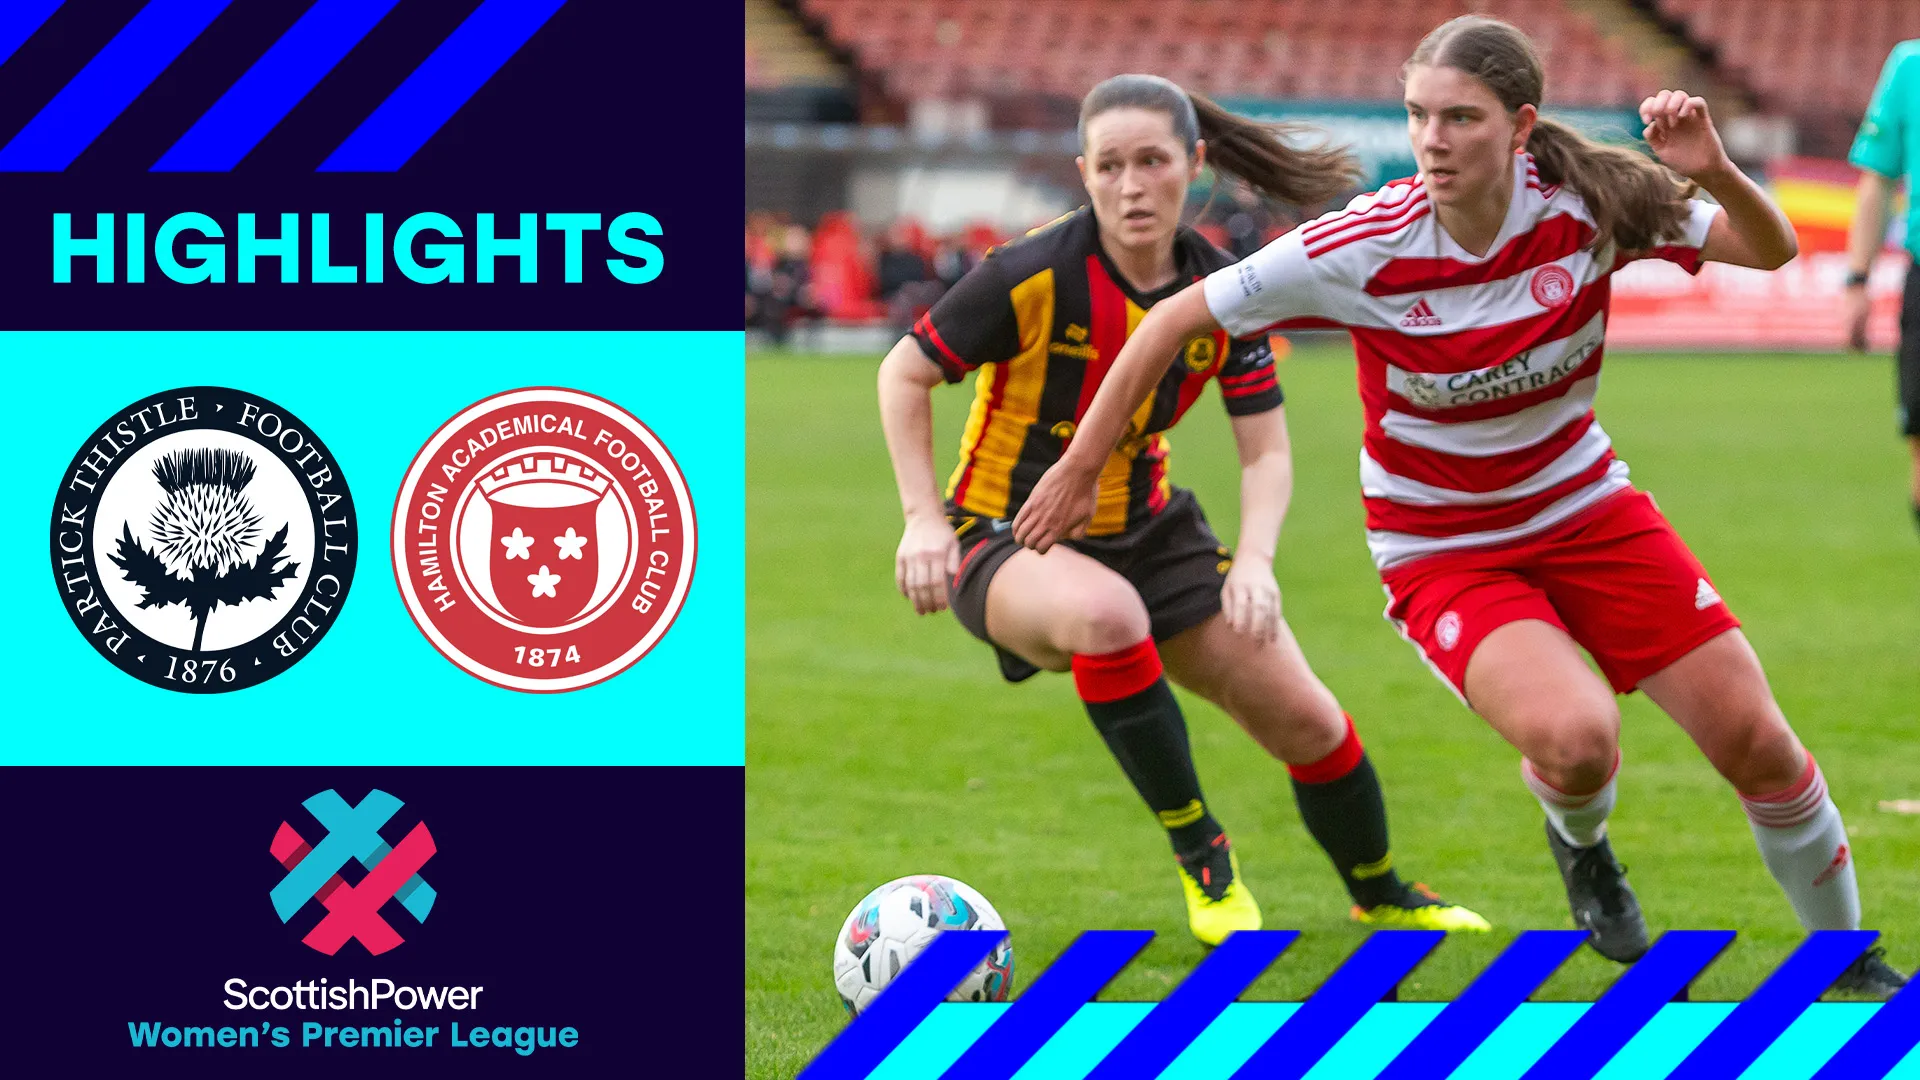 Image for Partick Thistle 3-0 Hamilton Academical | Jags make history with win over Accies at Firhill | SWPL